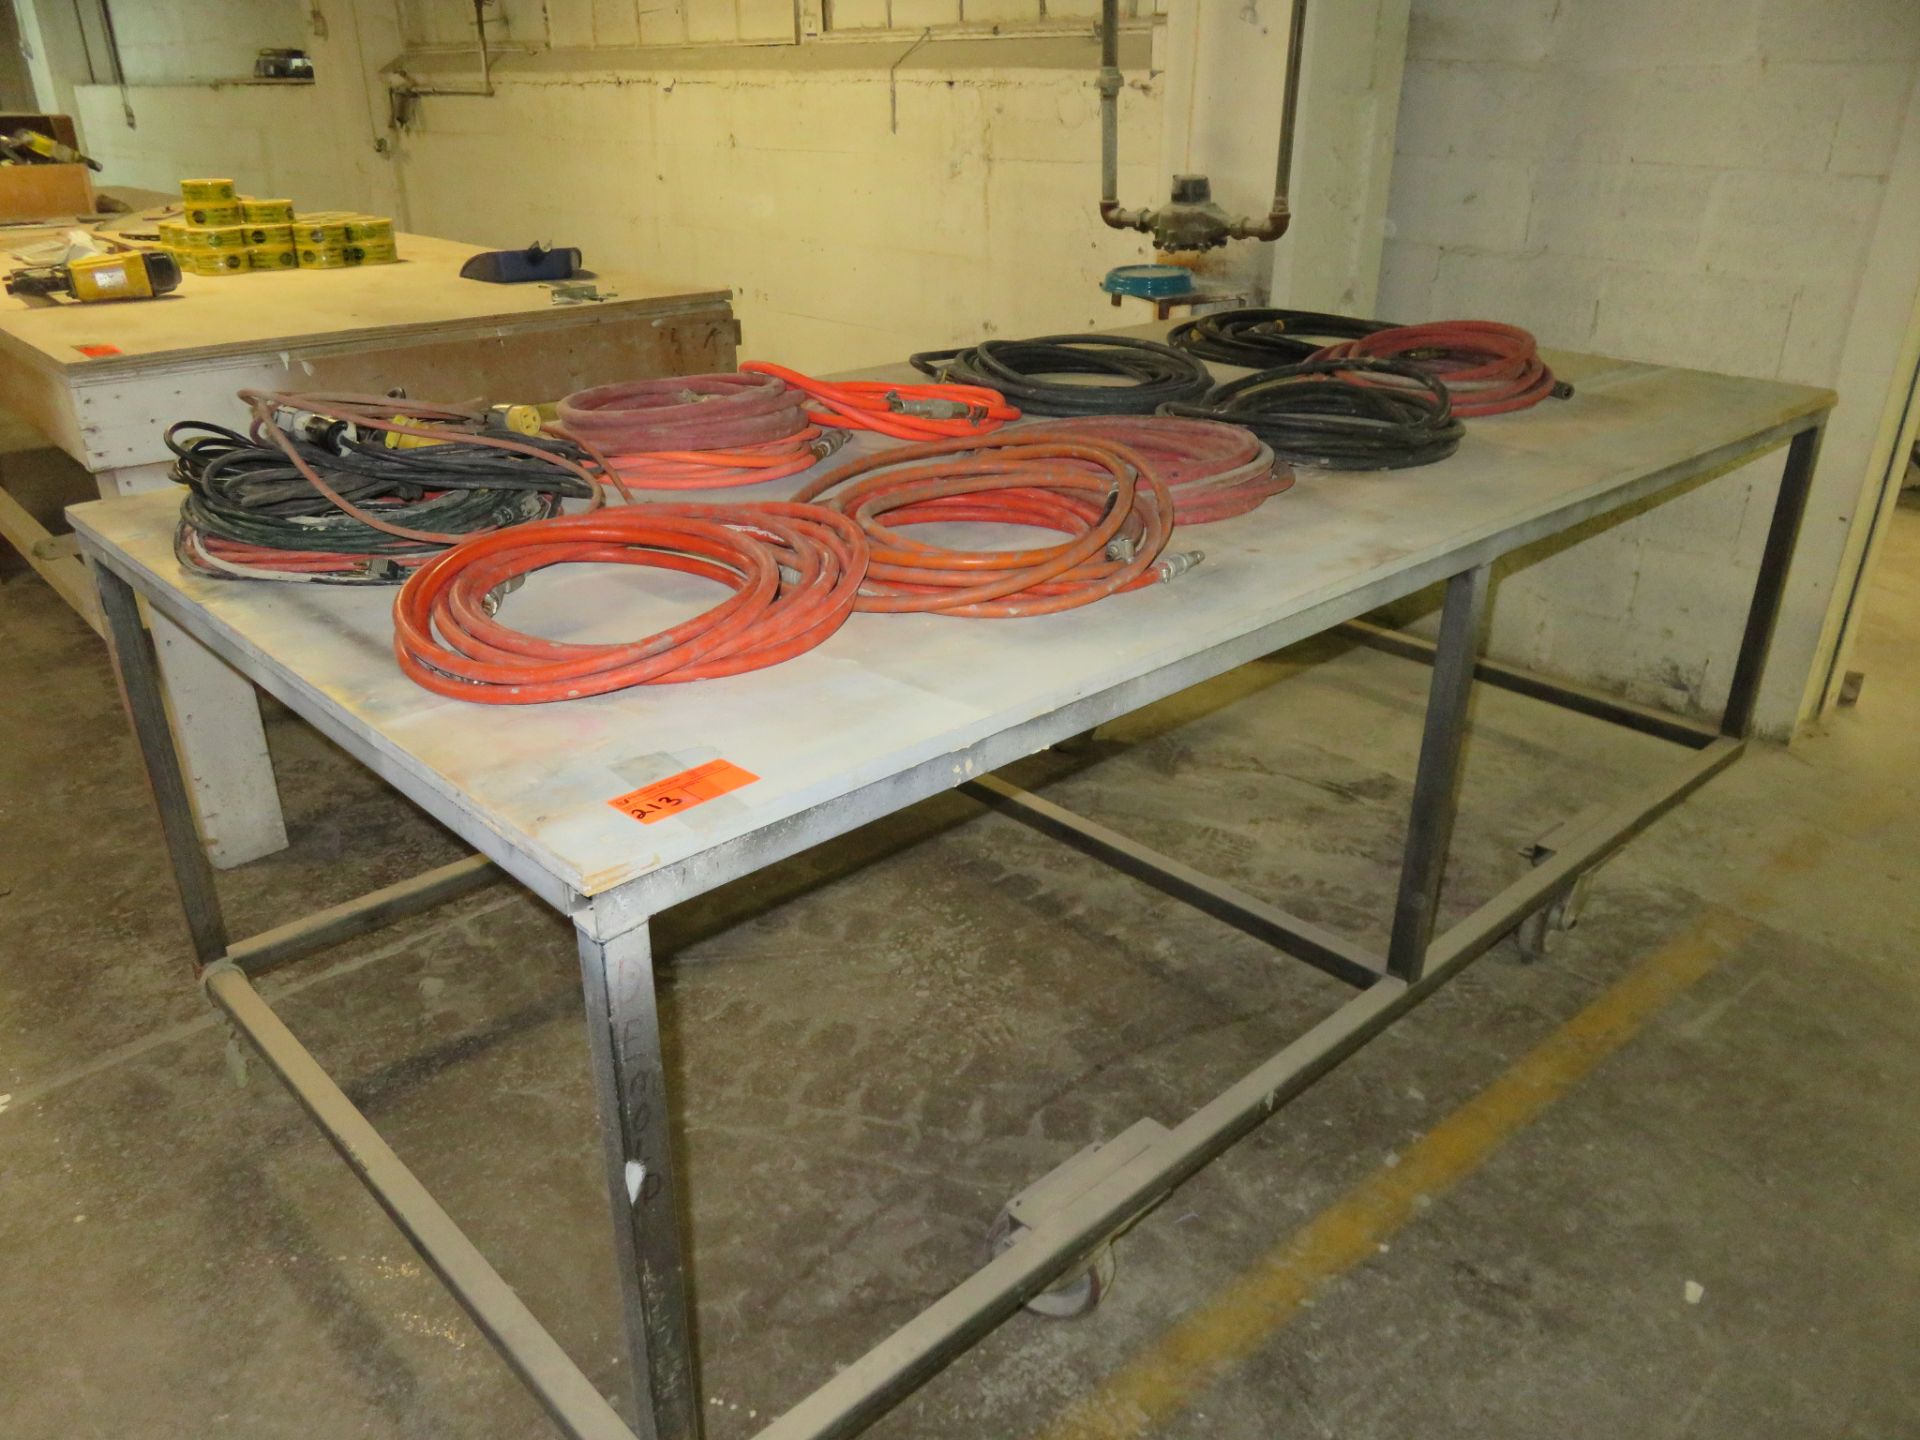 Welded Work Table approx 4'x8' & Hoses Lot